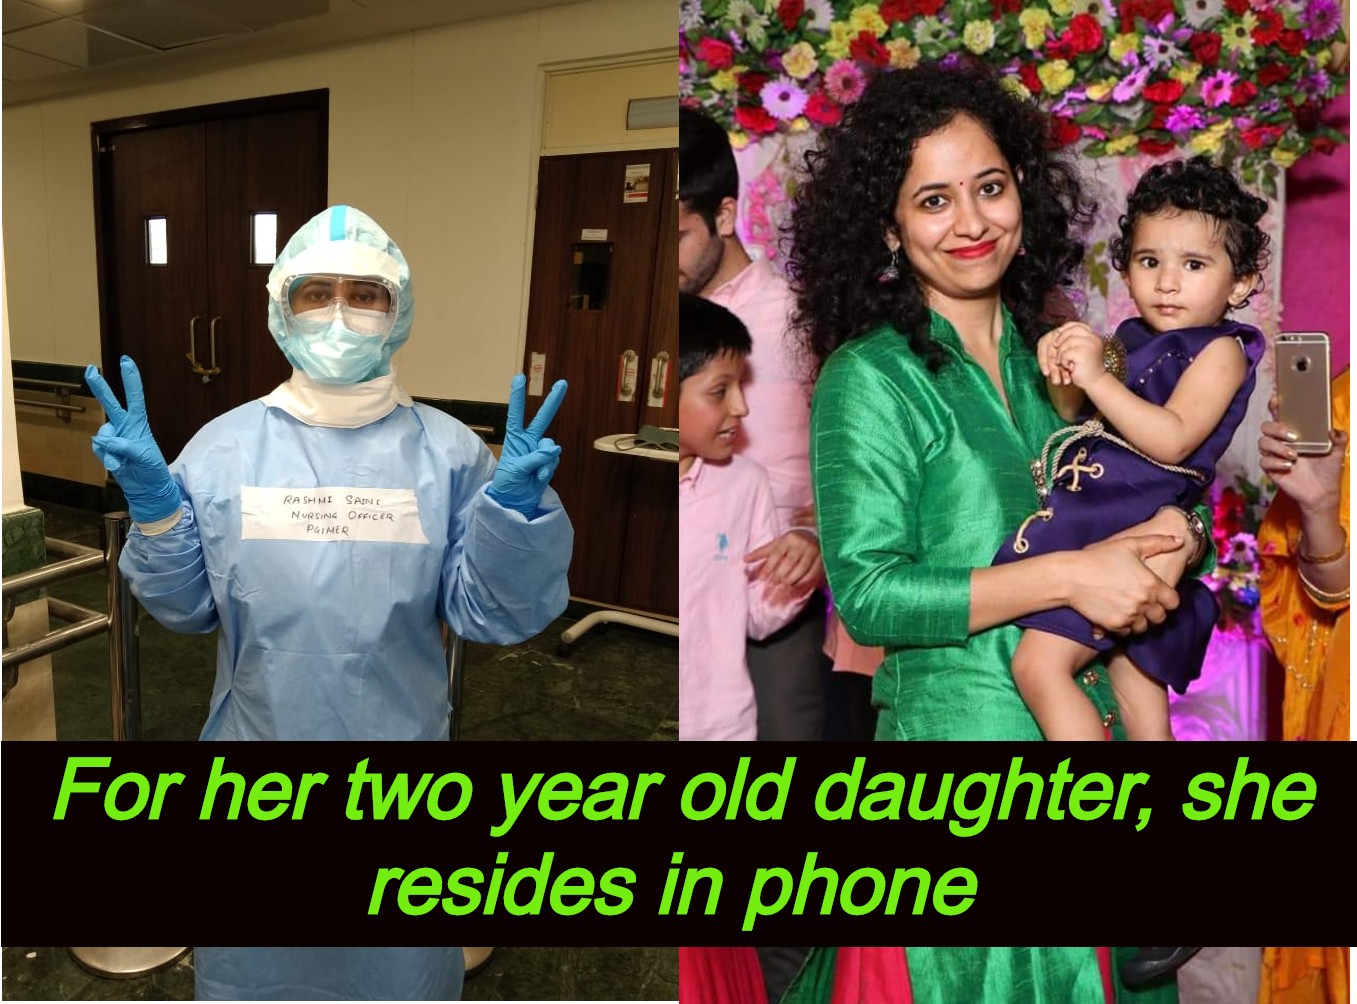 Where's Mom? She is in Phone. A tale of two-year-old and her Nursing Officer Mom